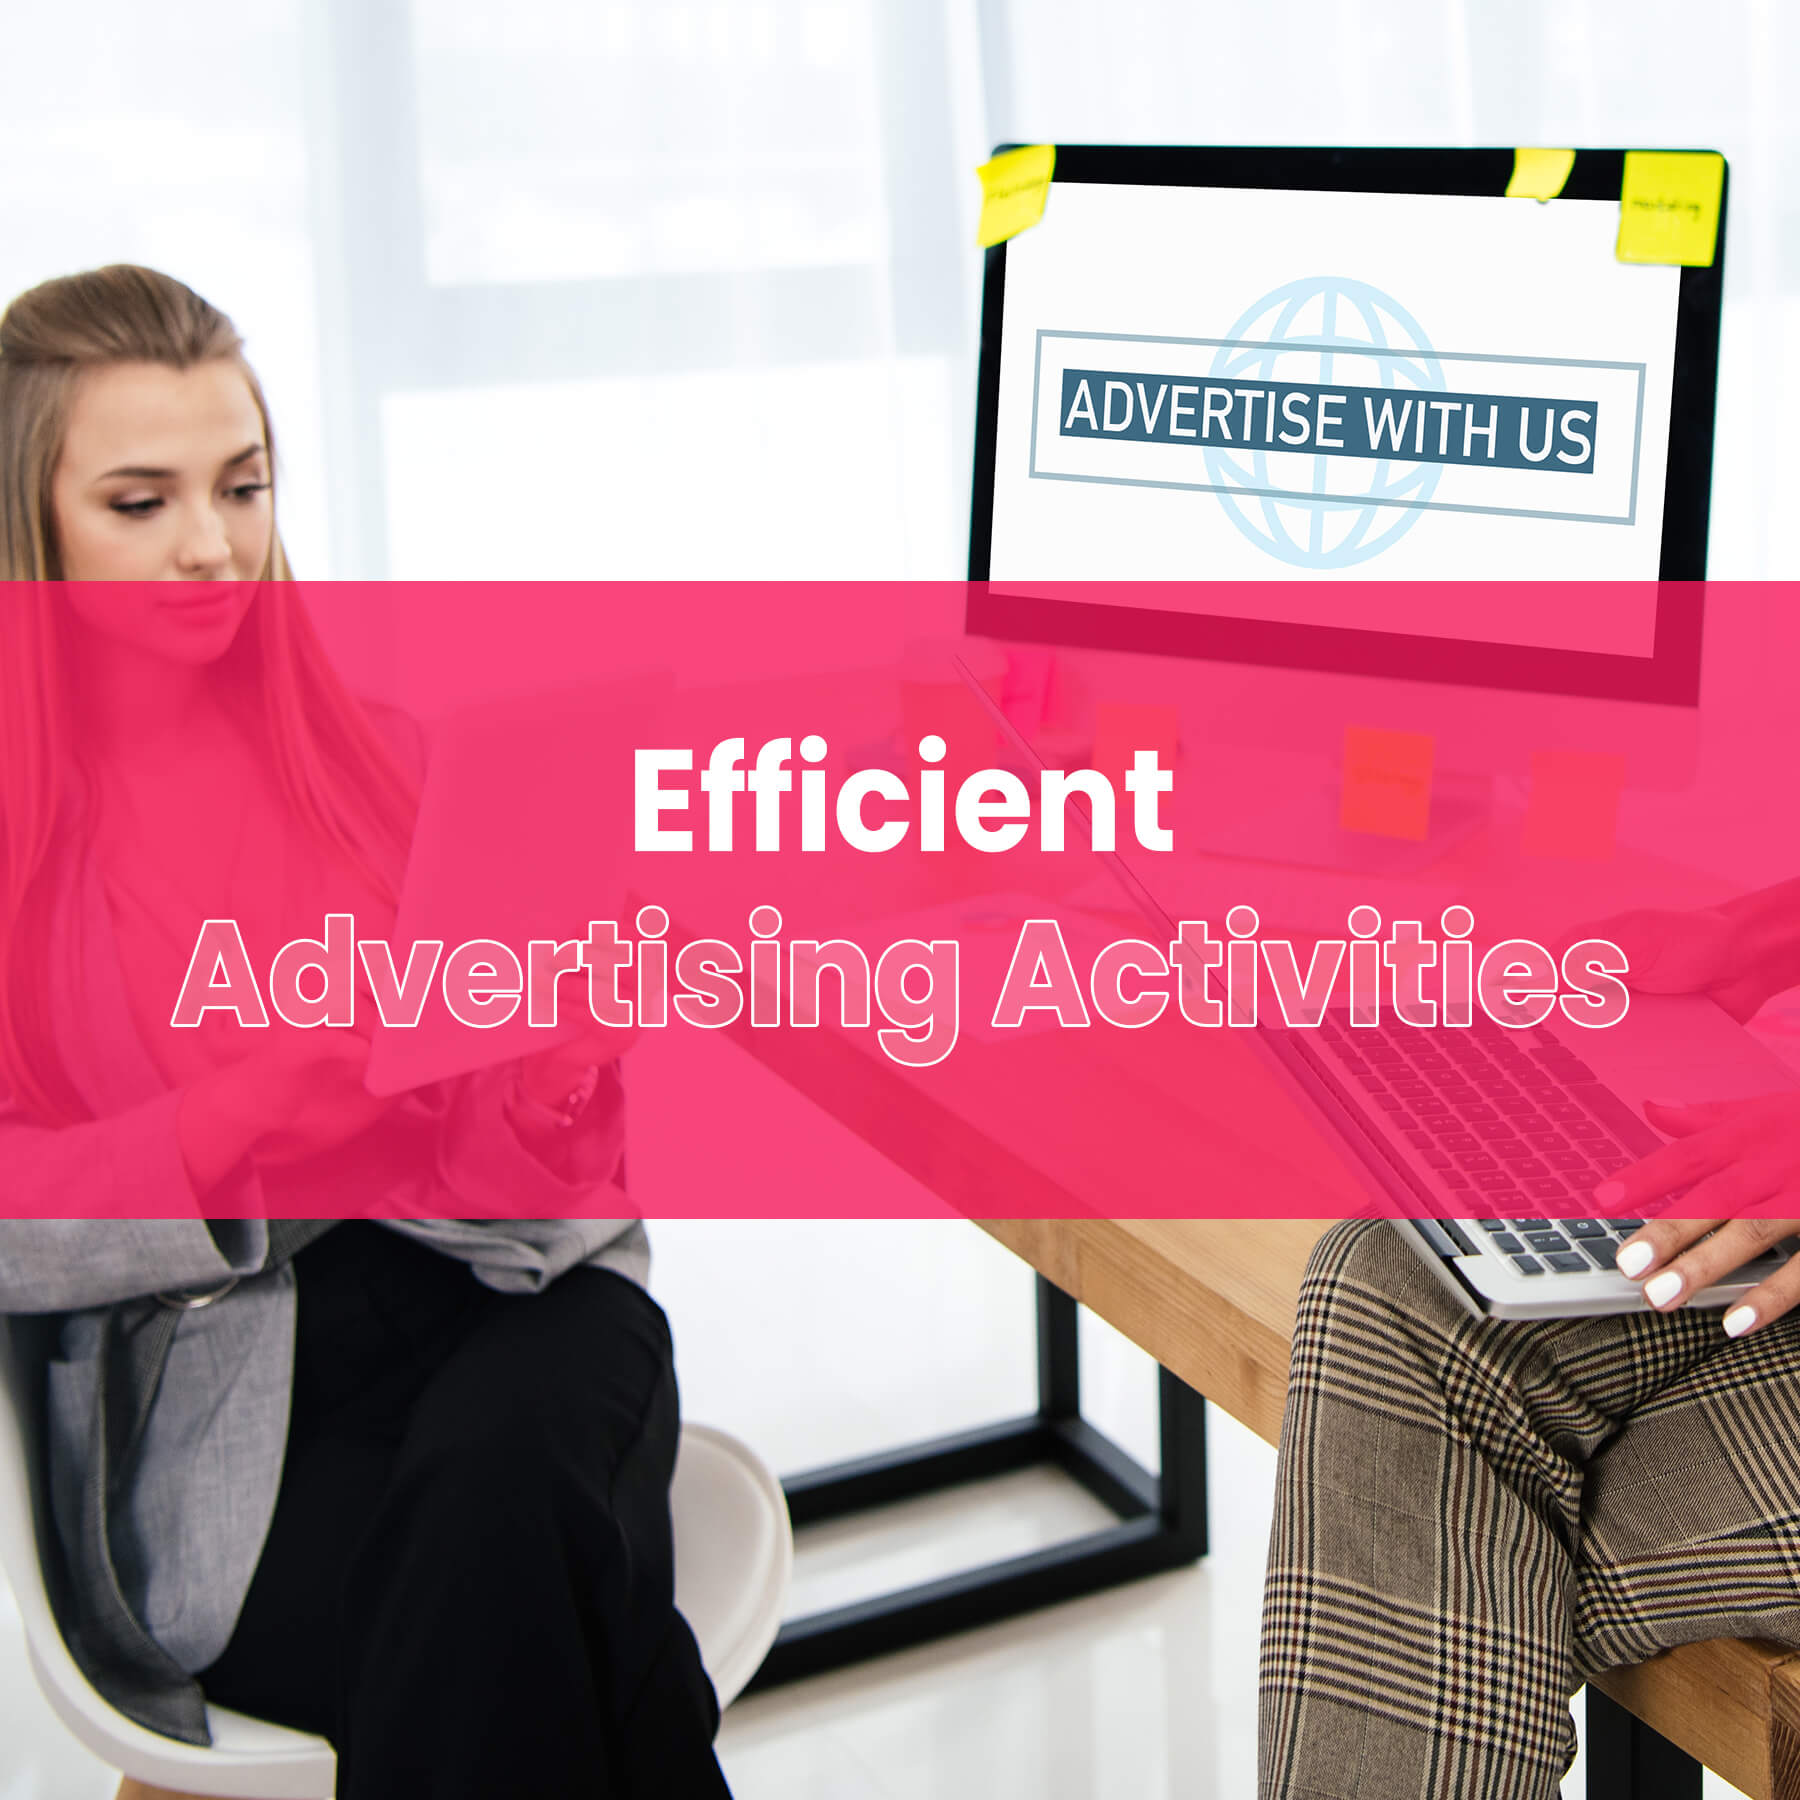 make-your-advertising-activities-more-efficient